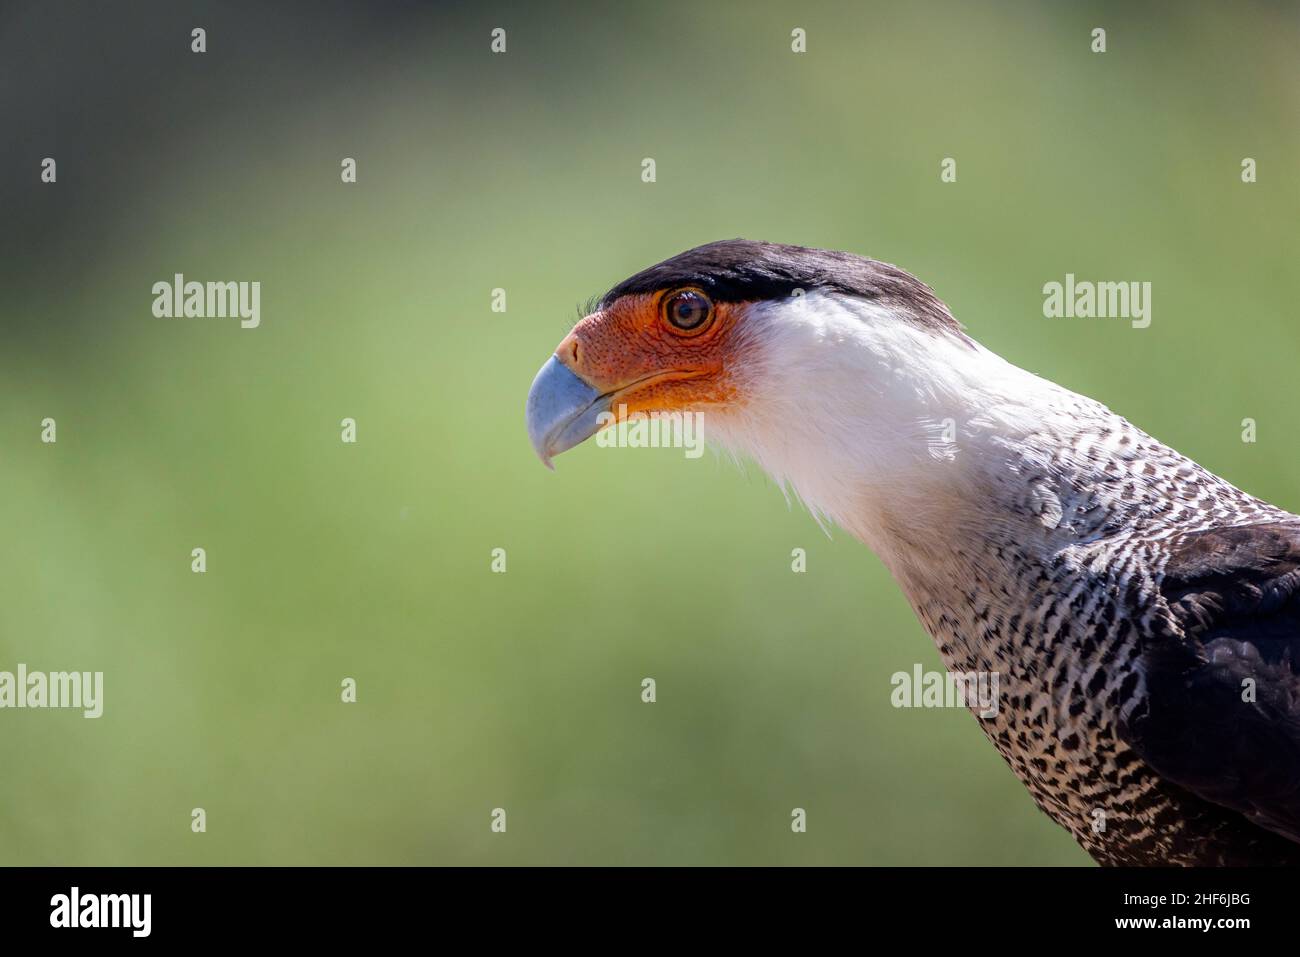 Caribbean caracara in the great outdoors of Costa Rica. Stock Photo